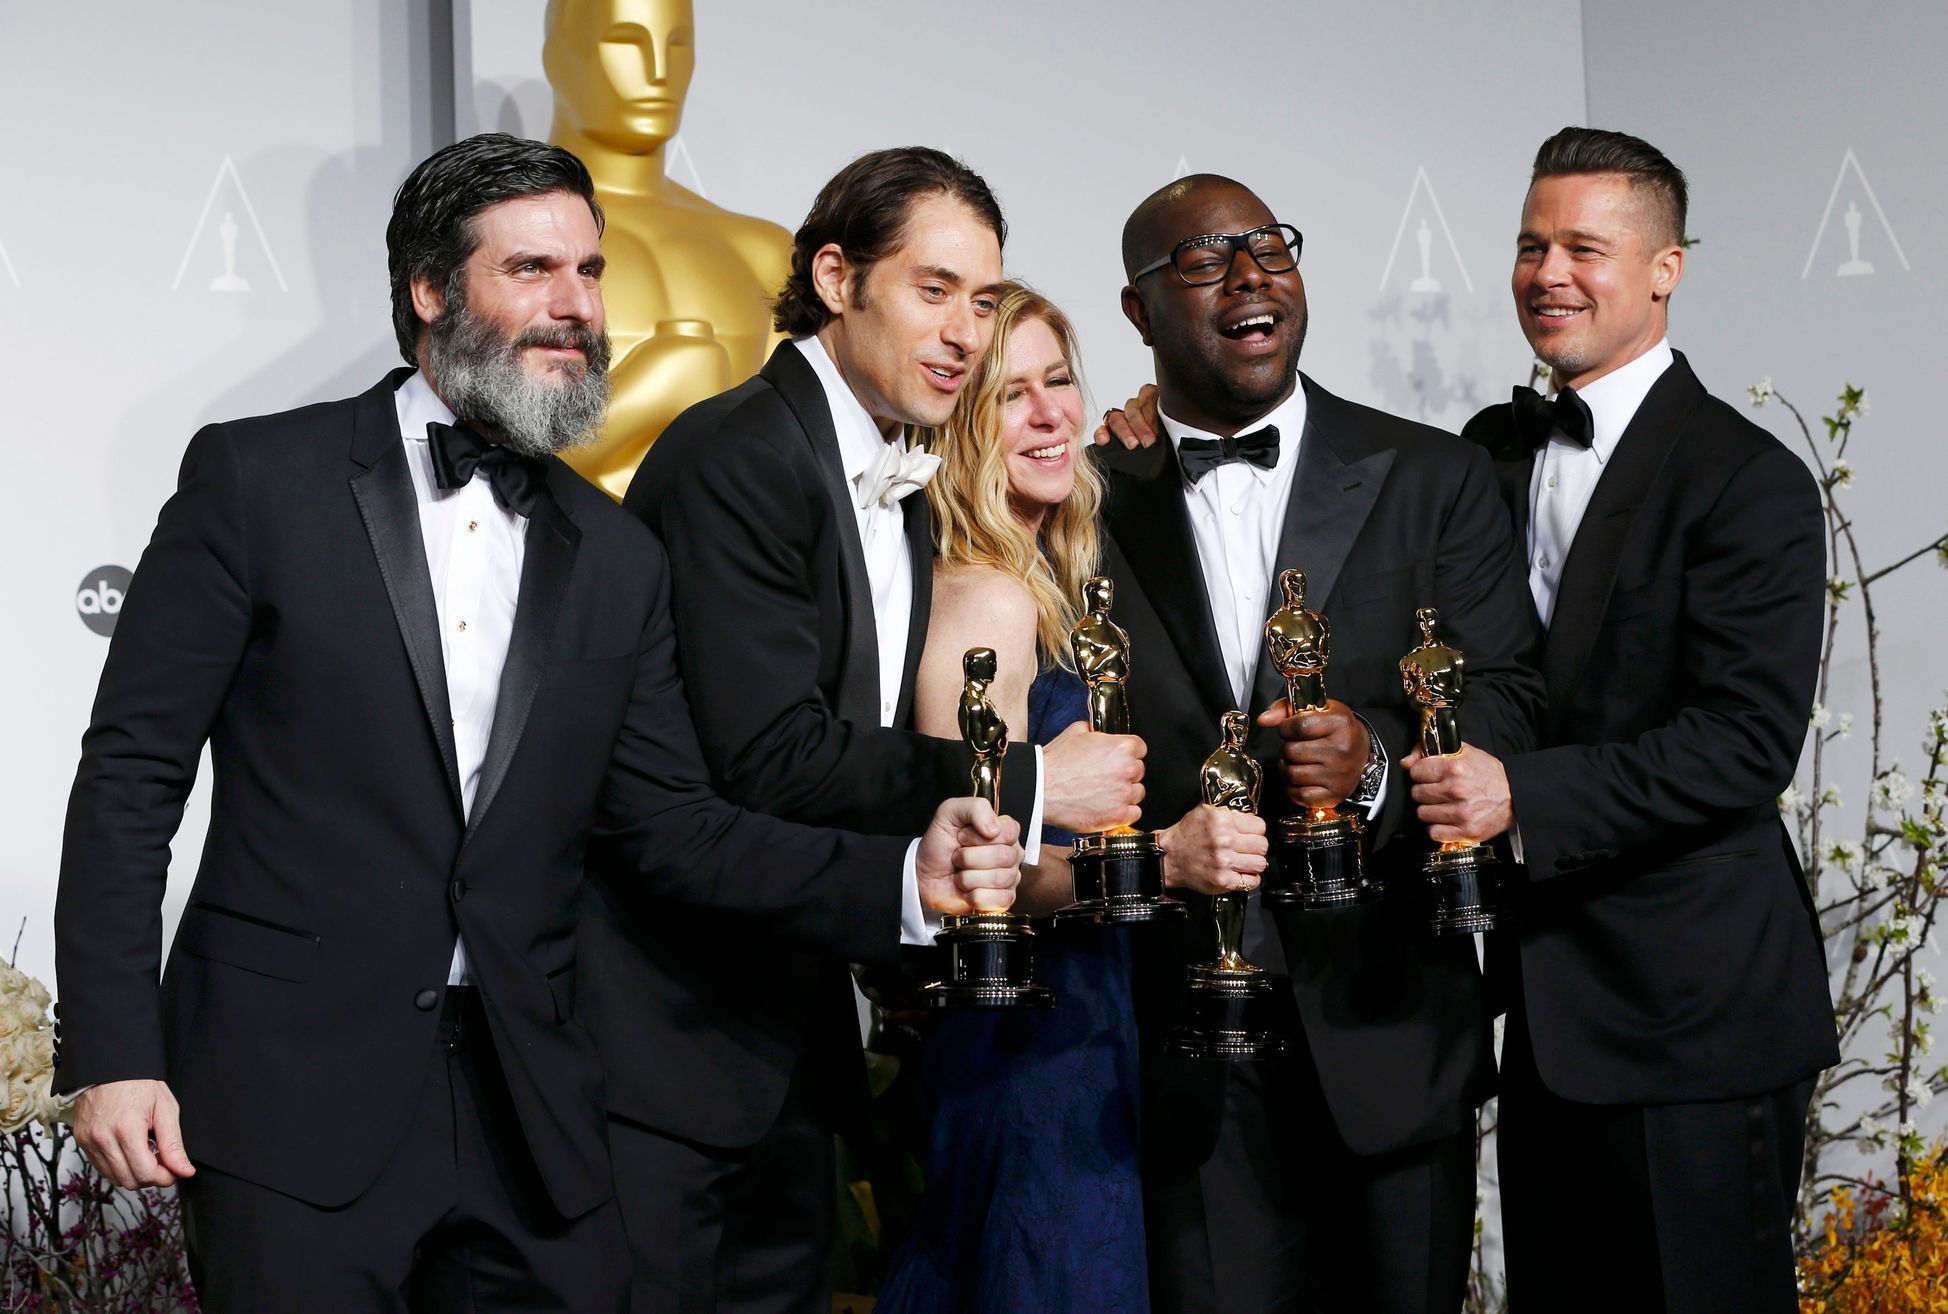 Producers Anthony Katagas, Jeremy Kliner, Dede Gardner, Steve McQueen and Brad Pitt pose with their awards for best picture for &quot;12 Years a Slave&quot; at the 86th Academy Awards in Hollywood